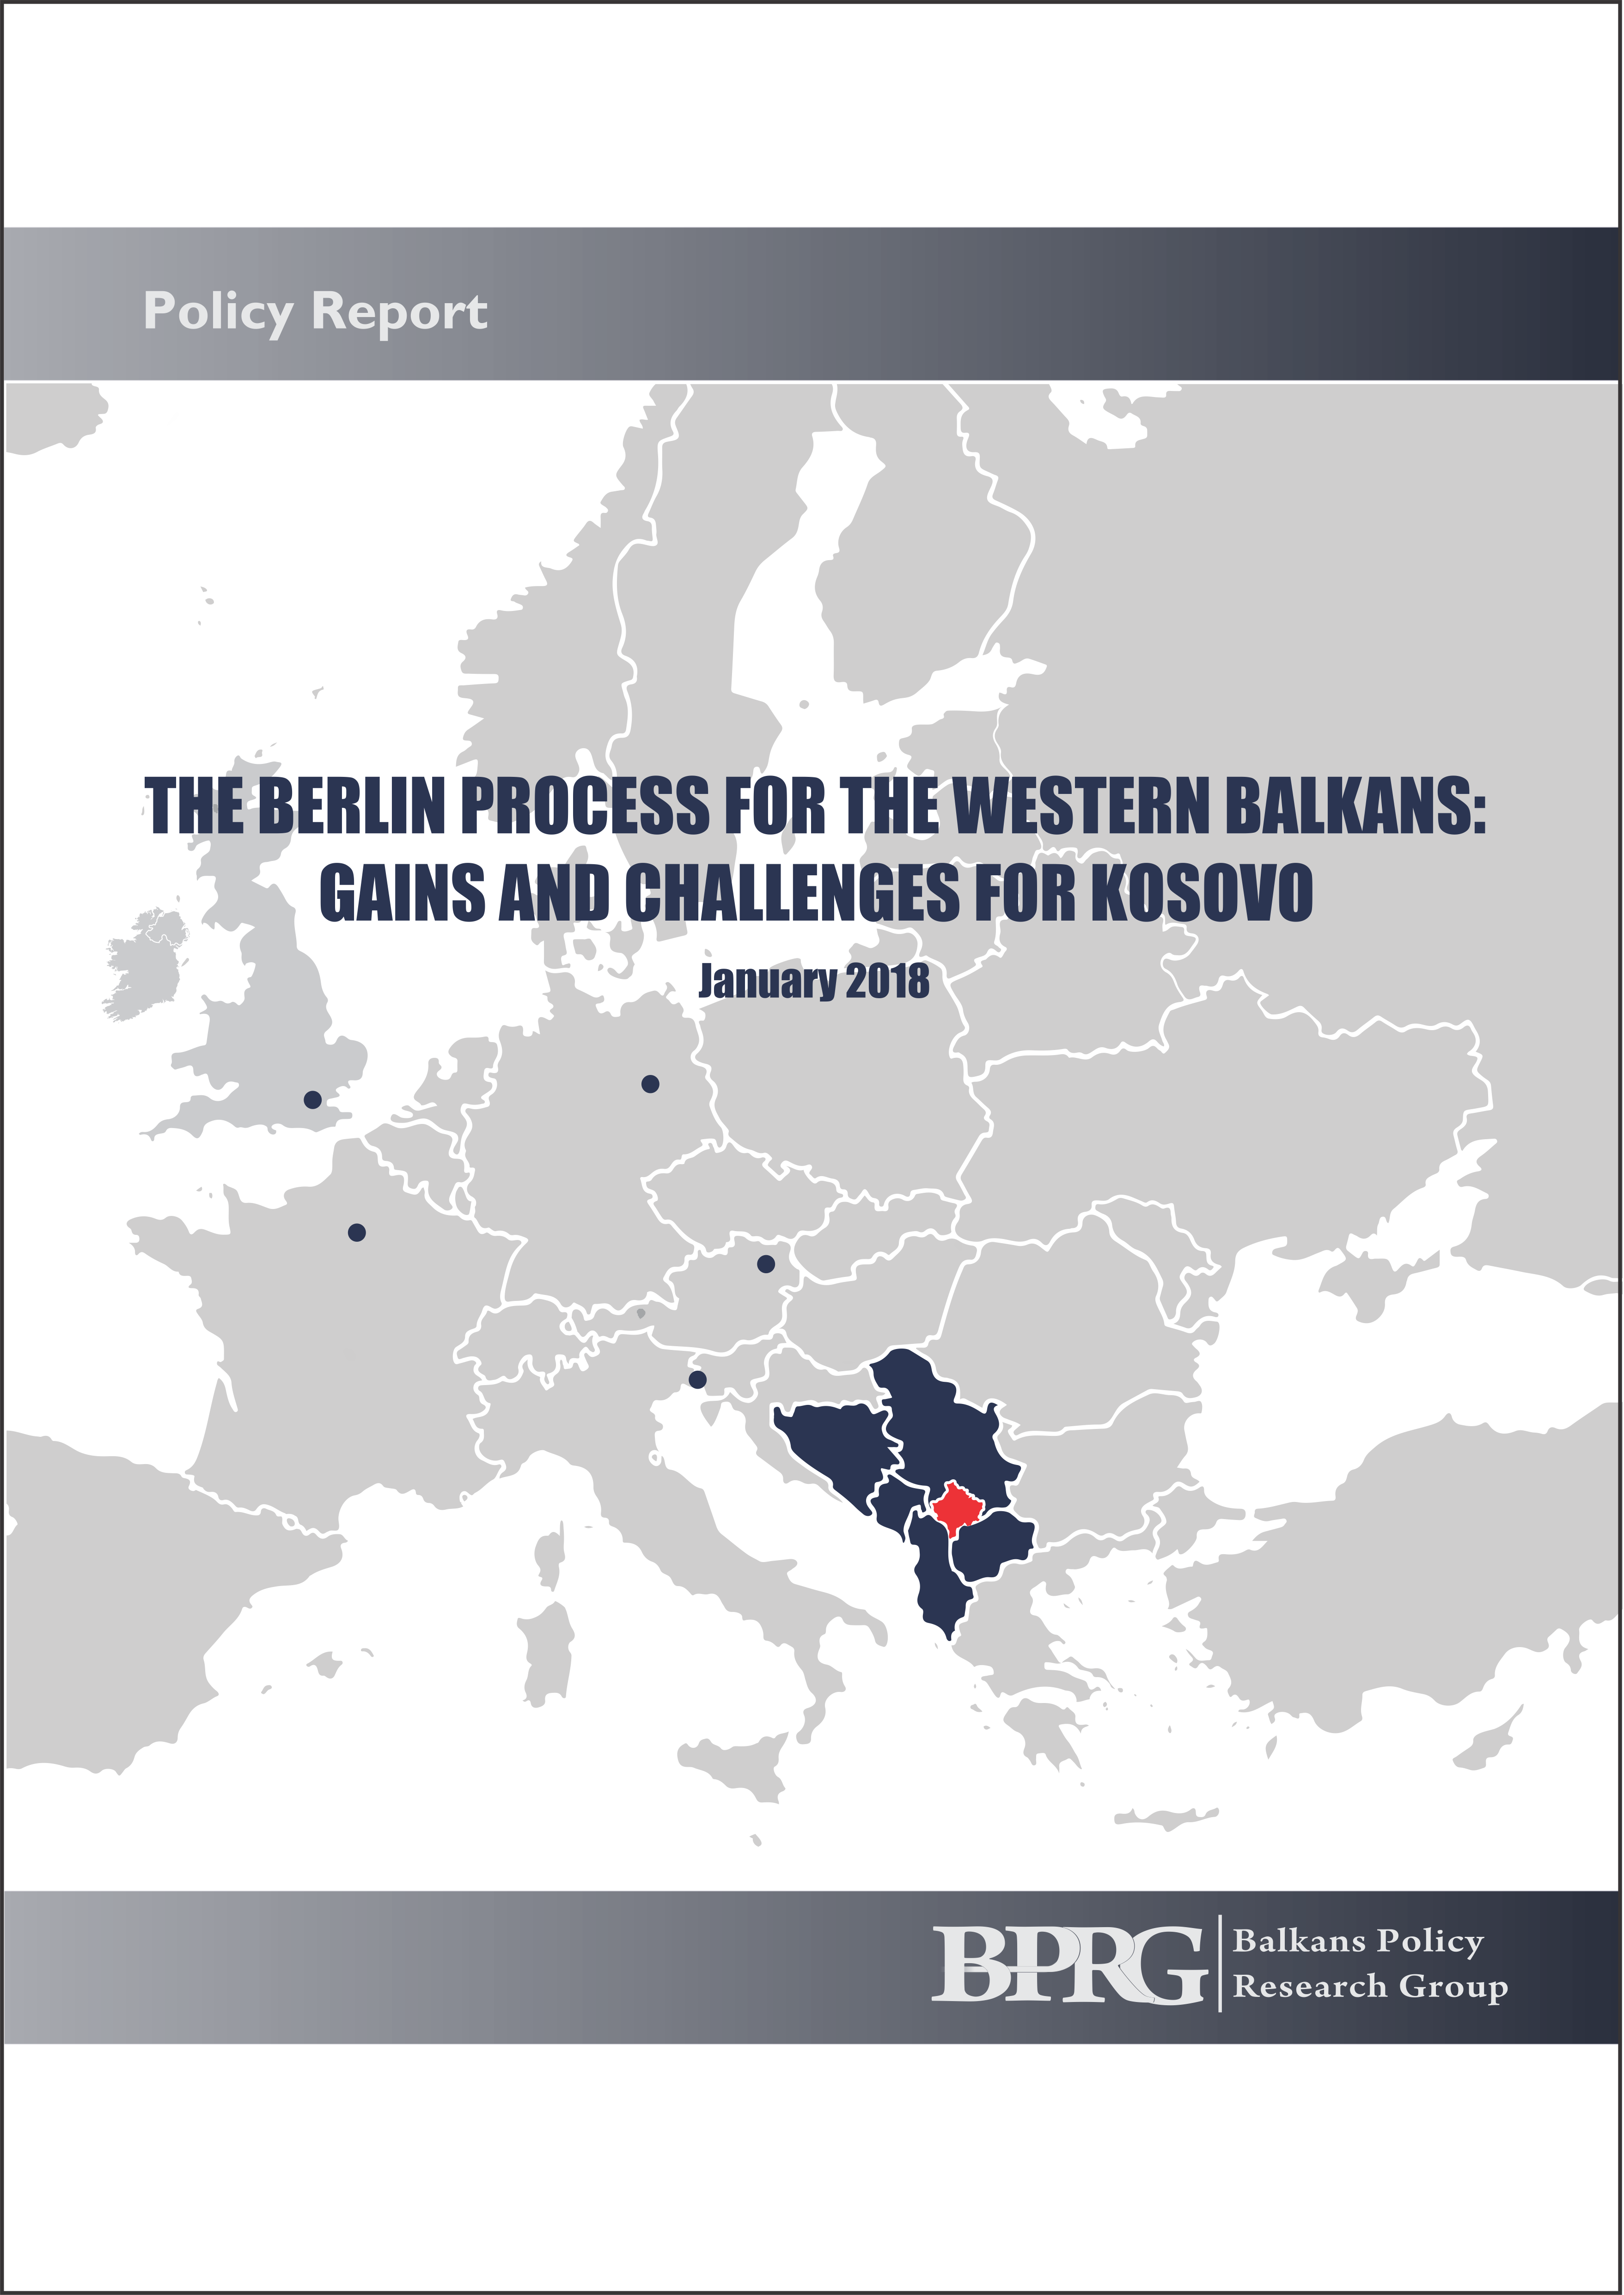 The Berlin Process for the Western Balkans: Gains and Challenges for Kosovo